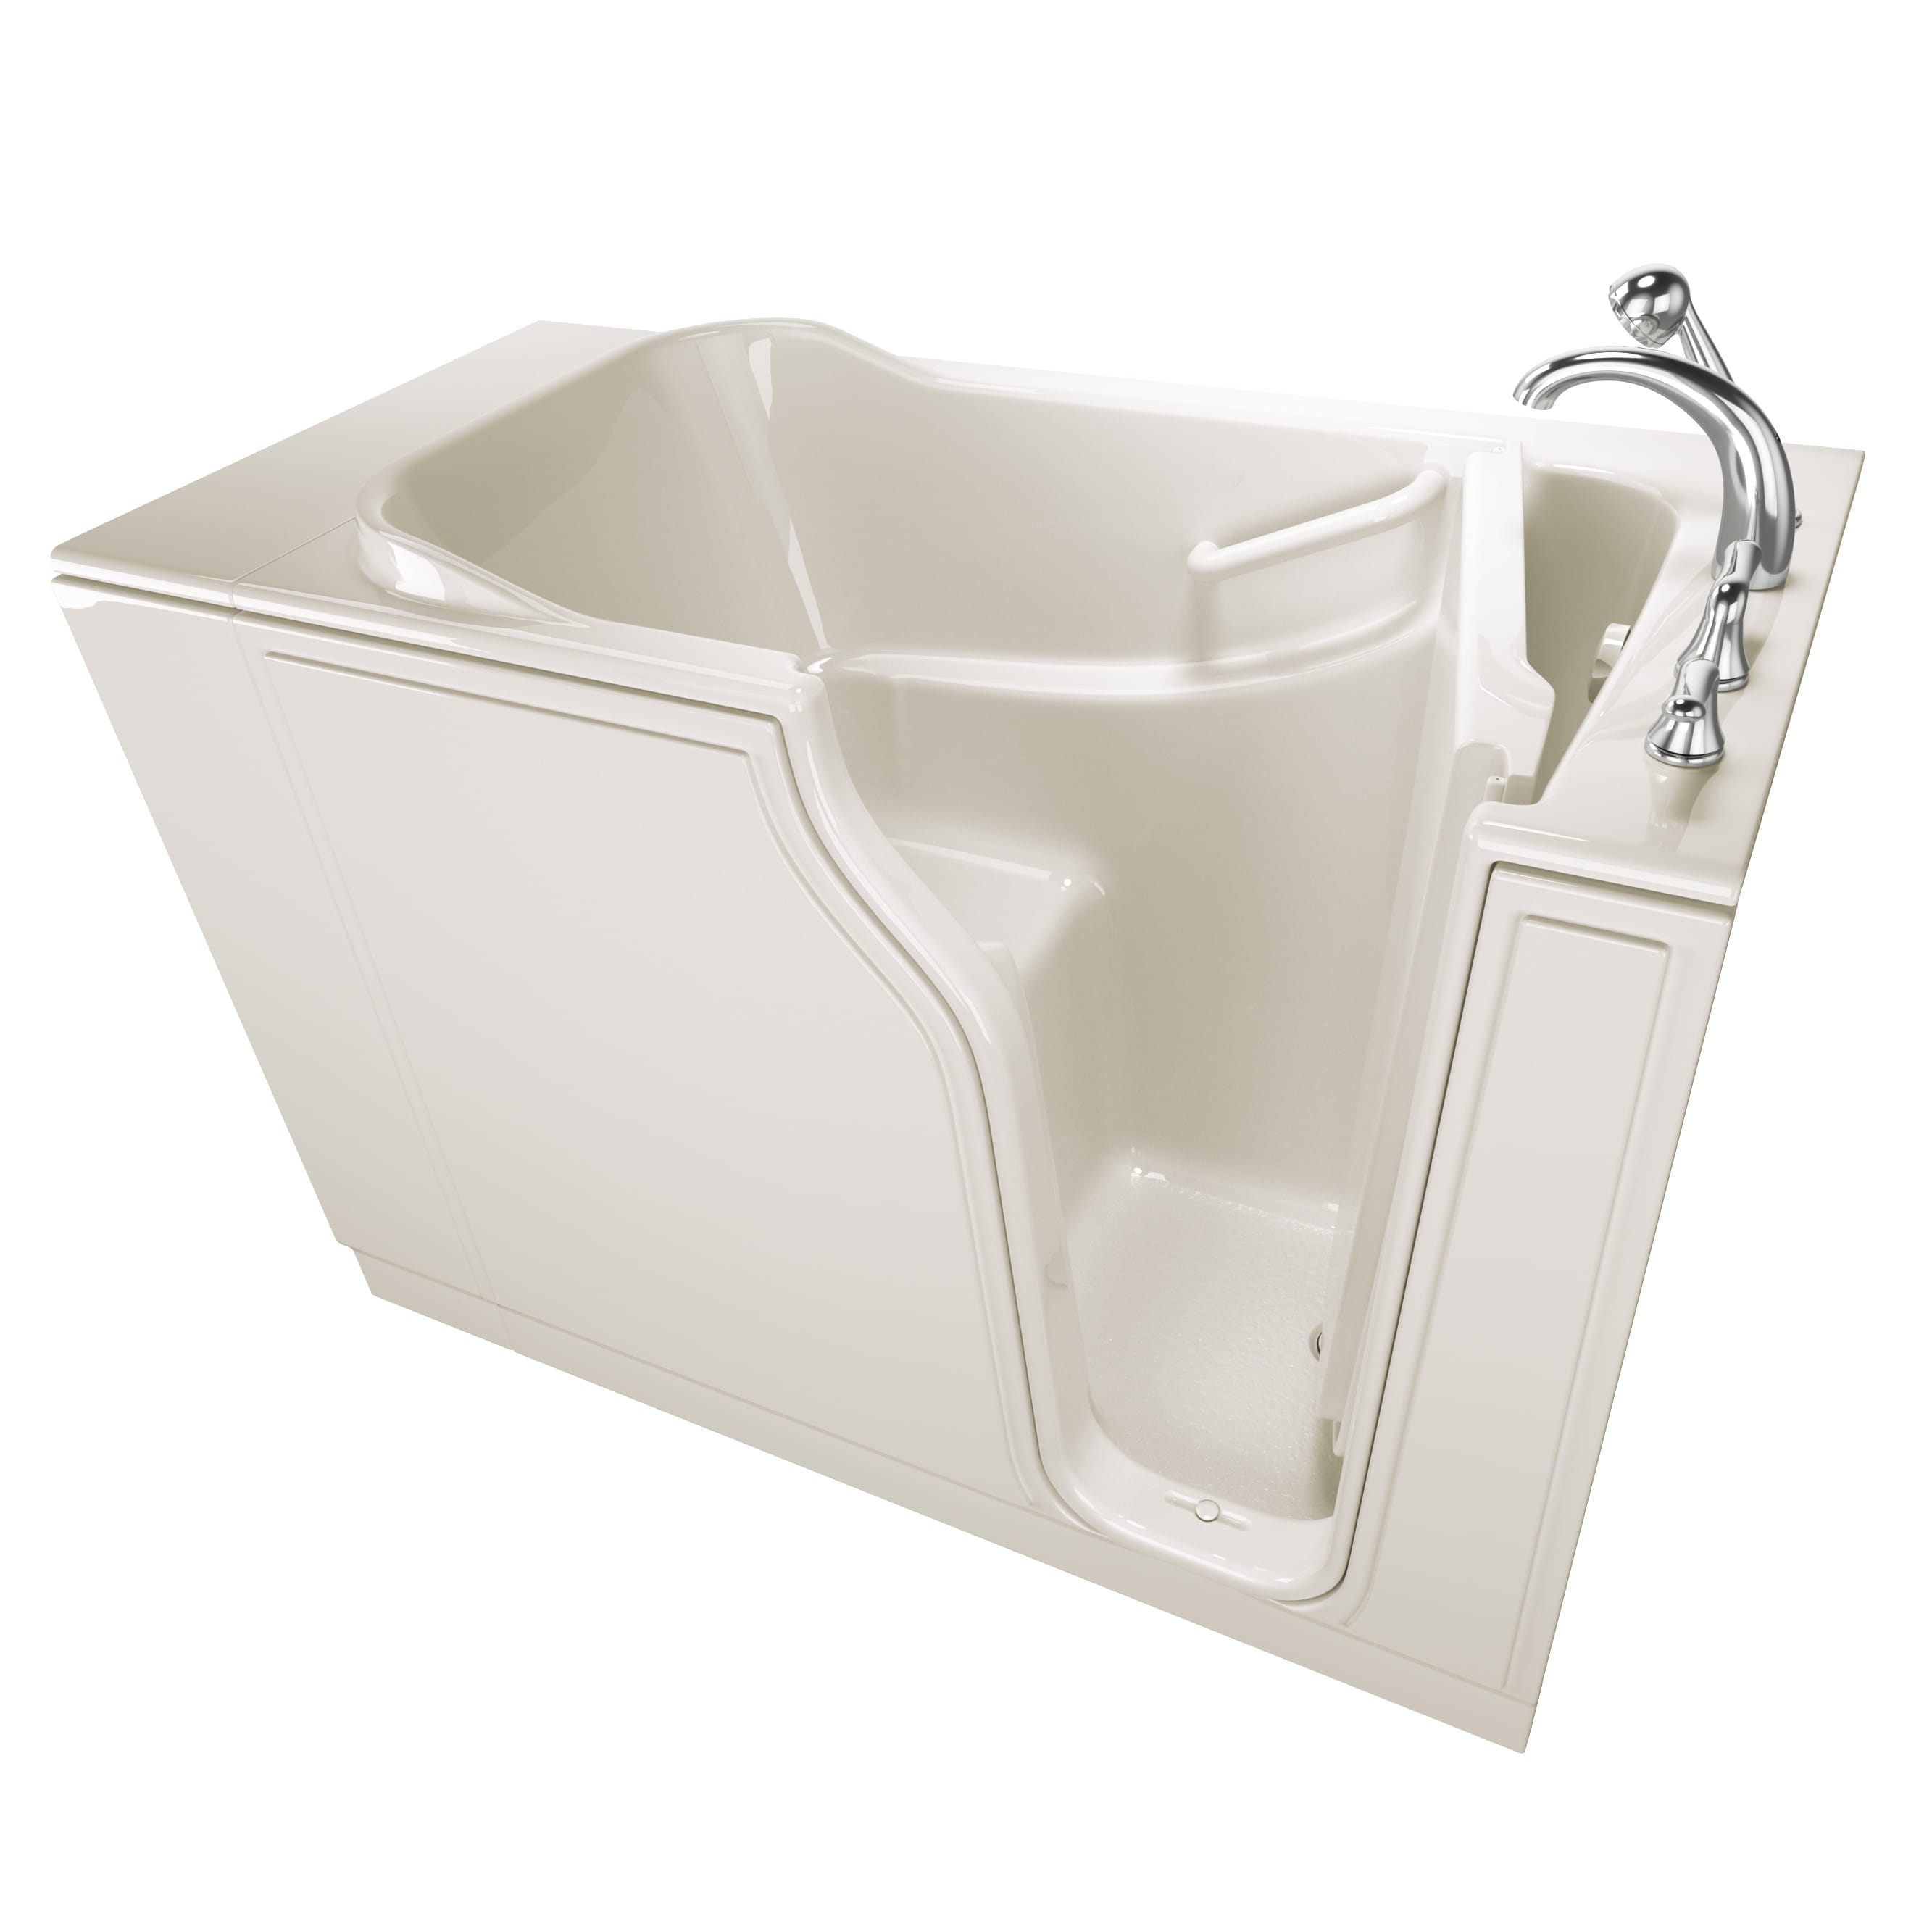 Gelcoat Entry Series 52 x 30-Inch Walk-In Tub With Soaker System – Right-Hand Drain With Faucet